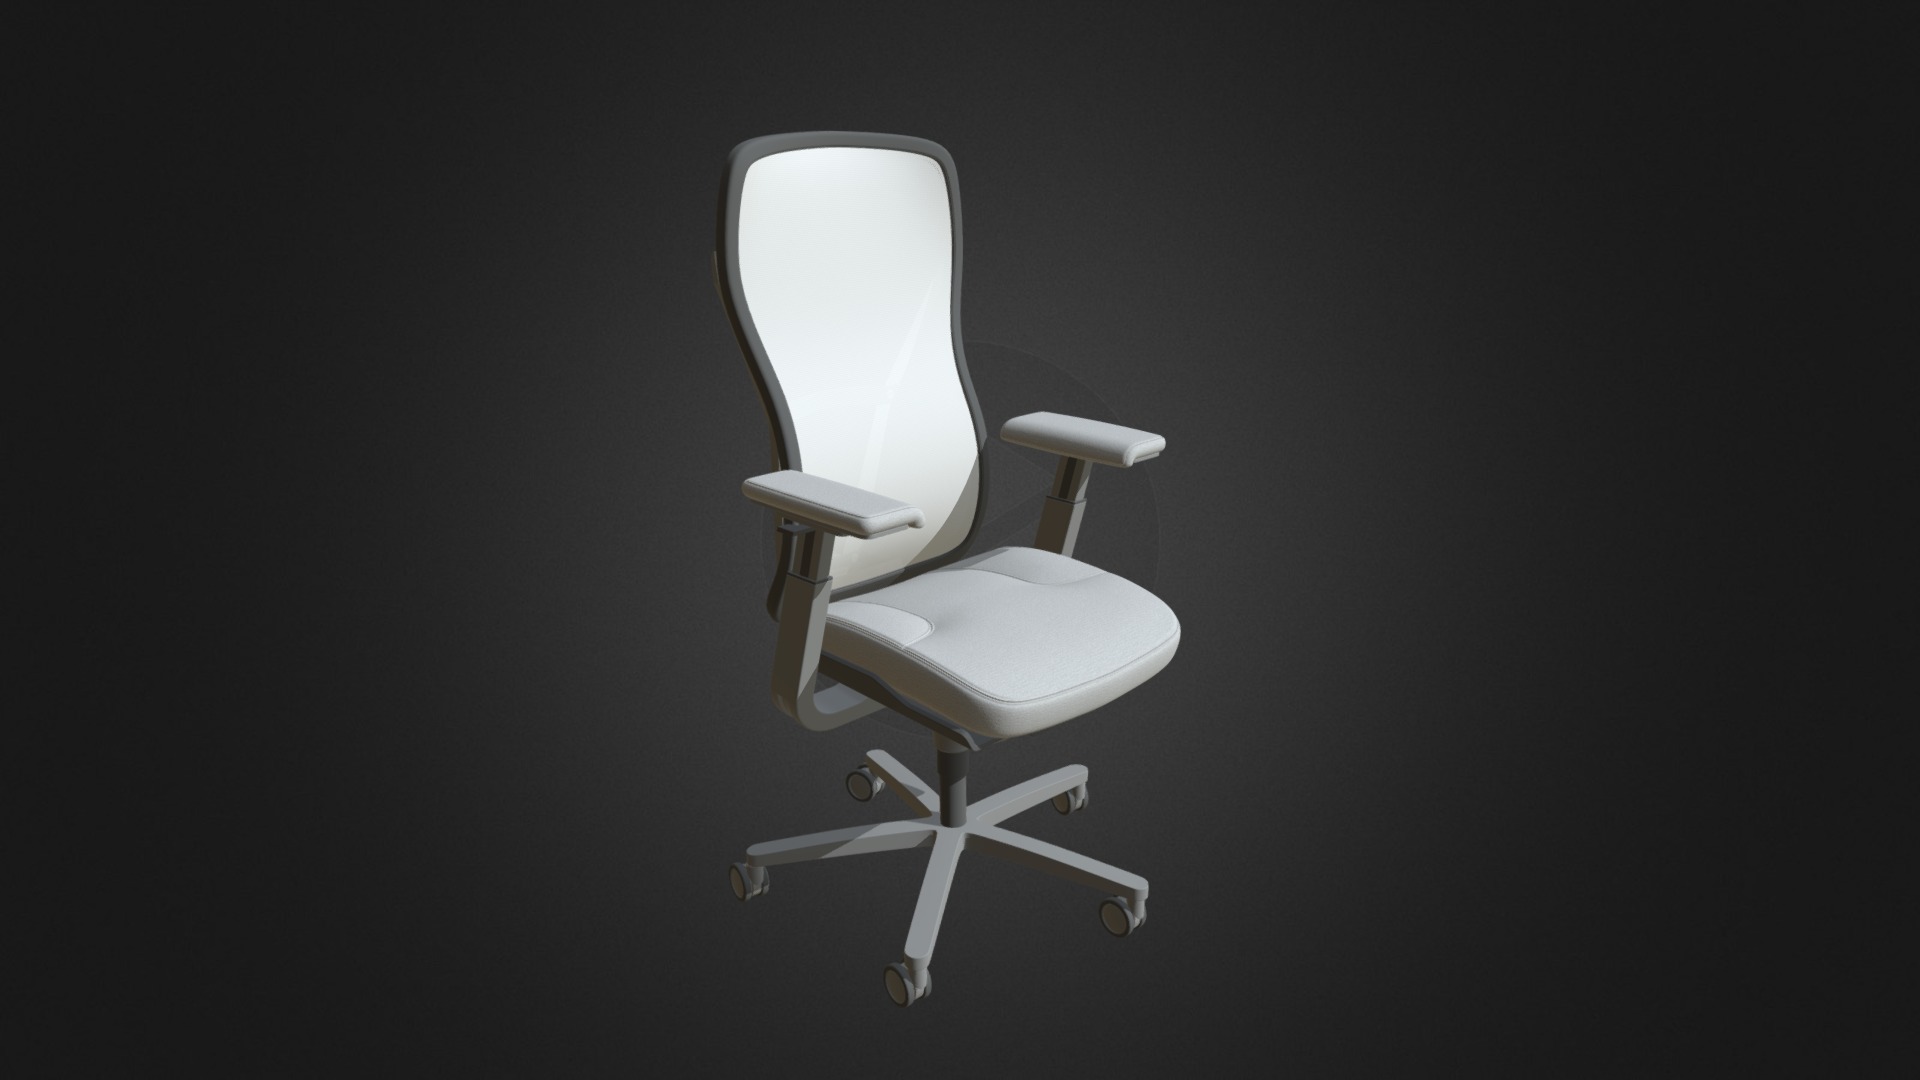 3D model Office Chair - This is a 3D model of the Office Chair. The 3D model is about a white chair with a white cushion.